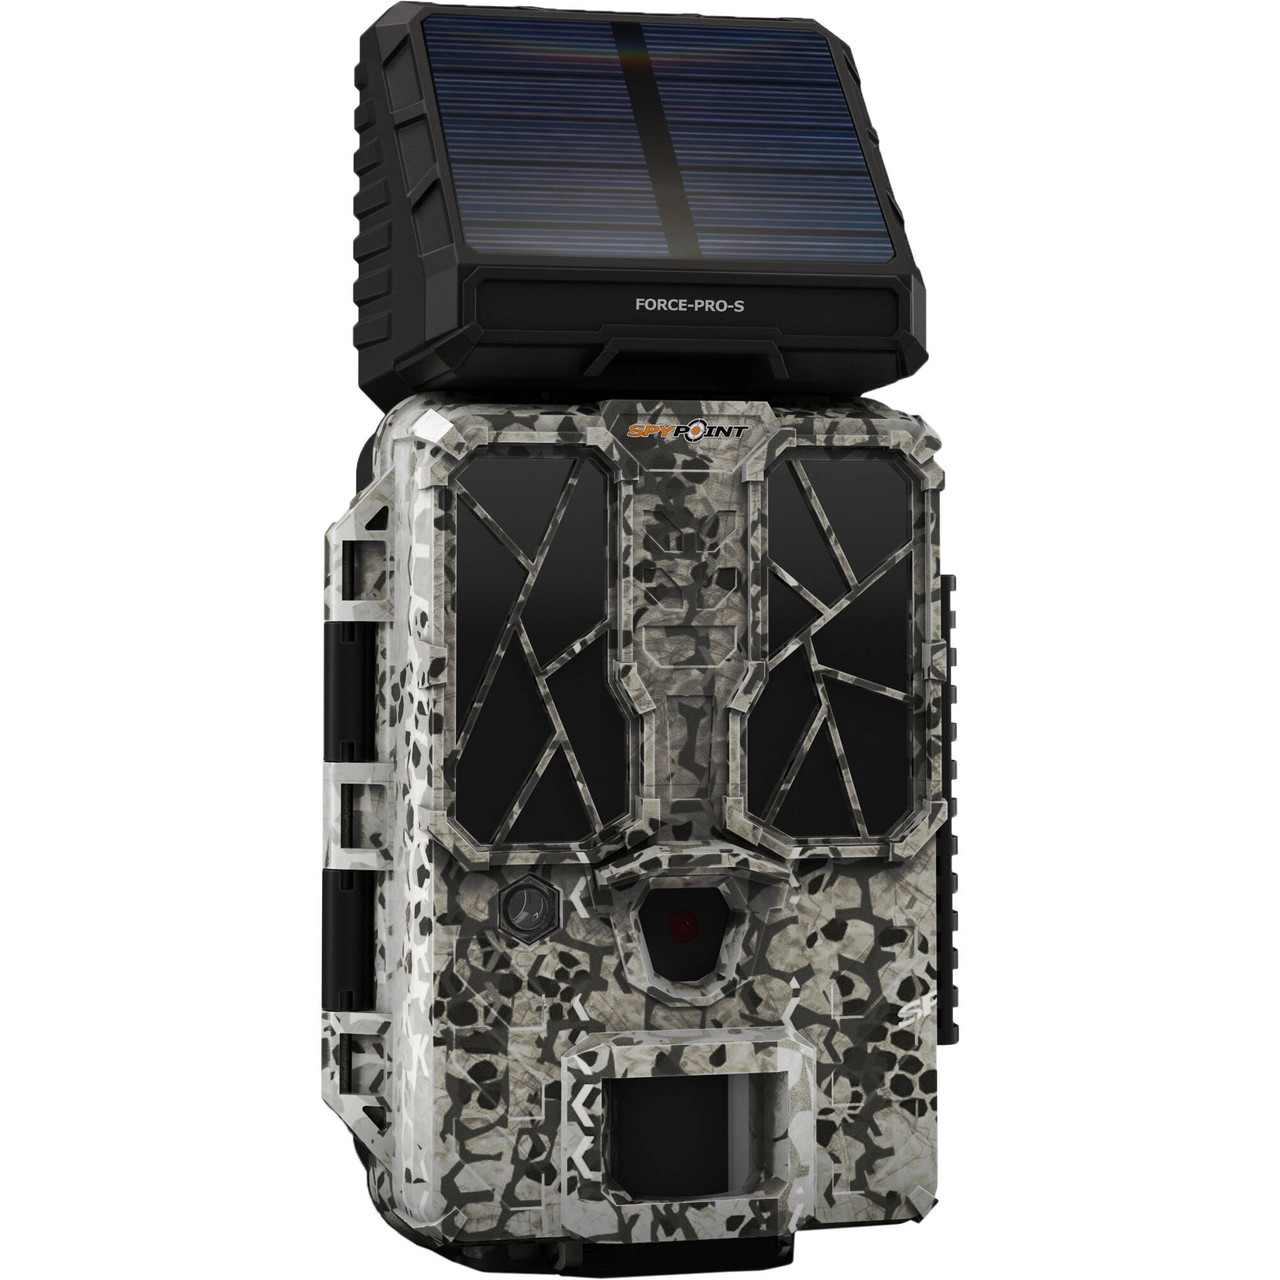 No need to waste time and money on disposable batteries with the Spypoint Force-Pro-S Trail Camera—its built-in solar panel keeps a lithium battery topped off and ready to capture the action on your property or hunting grounds. With a fast 0.2-second trigger time, 30MP photo capability, and 4K video with audio, the Force-Pro-S delivers imagery you need to plan for a successful hunting season.

The camera has a detection range of 110' and its 54 infrared LEDs produce a flash range of 90'. The internal lithium battery needs to be charged from an external source before installation; after that, the solar panel takes over. You can also power the camera with 8 AA batteries.

General
Super-fast 0.2-second trigger speed ensures you won't miss a thing
54 IR LED flash with a range of about 90 feet
No-glow flash won't disturb animals when it goes off in the pitch dark
Up to 110-foot detection range
One motion sensor covers three detection zones
Delay mode allows you to select the time period before the camera can detect again and take another photo or video
Accepts SD memory cards from 2 to 128GB, 16GB card included
1.5" LCD screen with simple navigation buttons and a menu-driven interface allows you to set up and configure the camera in the field
Runs on built-in rechargeable lithium battery maintained by integrated solar panel
Can also run on eight user-supplied alkaline AA batteries or an optional 12 VDC external battery
Photos
Color by day, black & white (IR) at night
Date, time, moon phase, and temperature (°C/°F) stamp
Multi-shot mode takes up to 6 photos per detection, configurable in settings
Video
Up to 4K resolution
Selectable 10-, 20-, 30-, 60-second recording times
Audio recording on all video settings
Mounting
Strap included to mount onto trees and poles
1/4"-20 socket allows you to mount the camera on support systems in an area without trees, like in a field